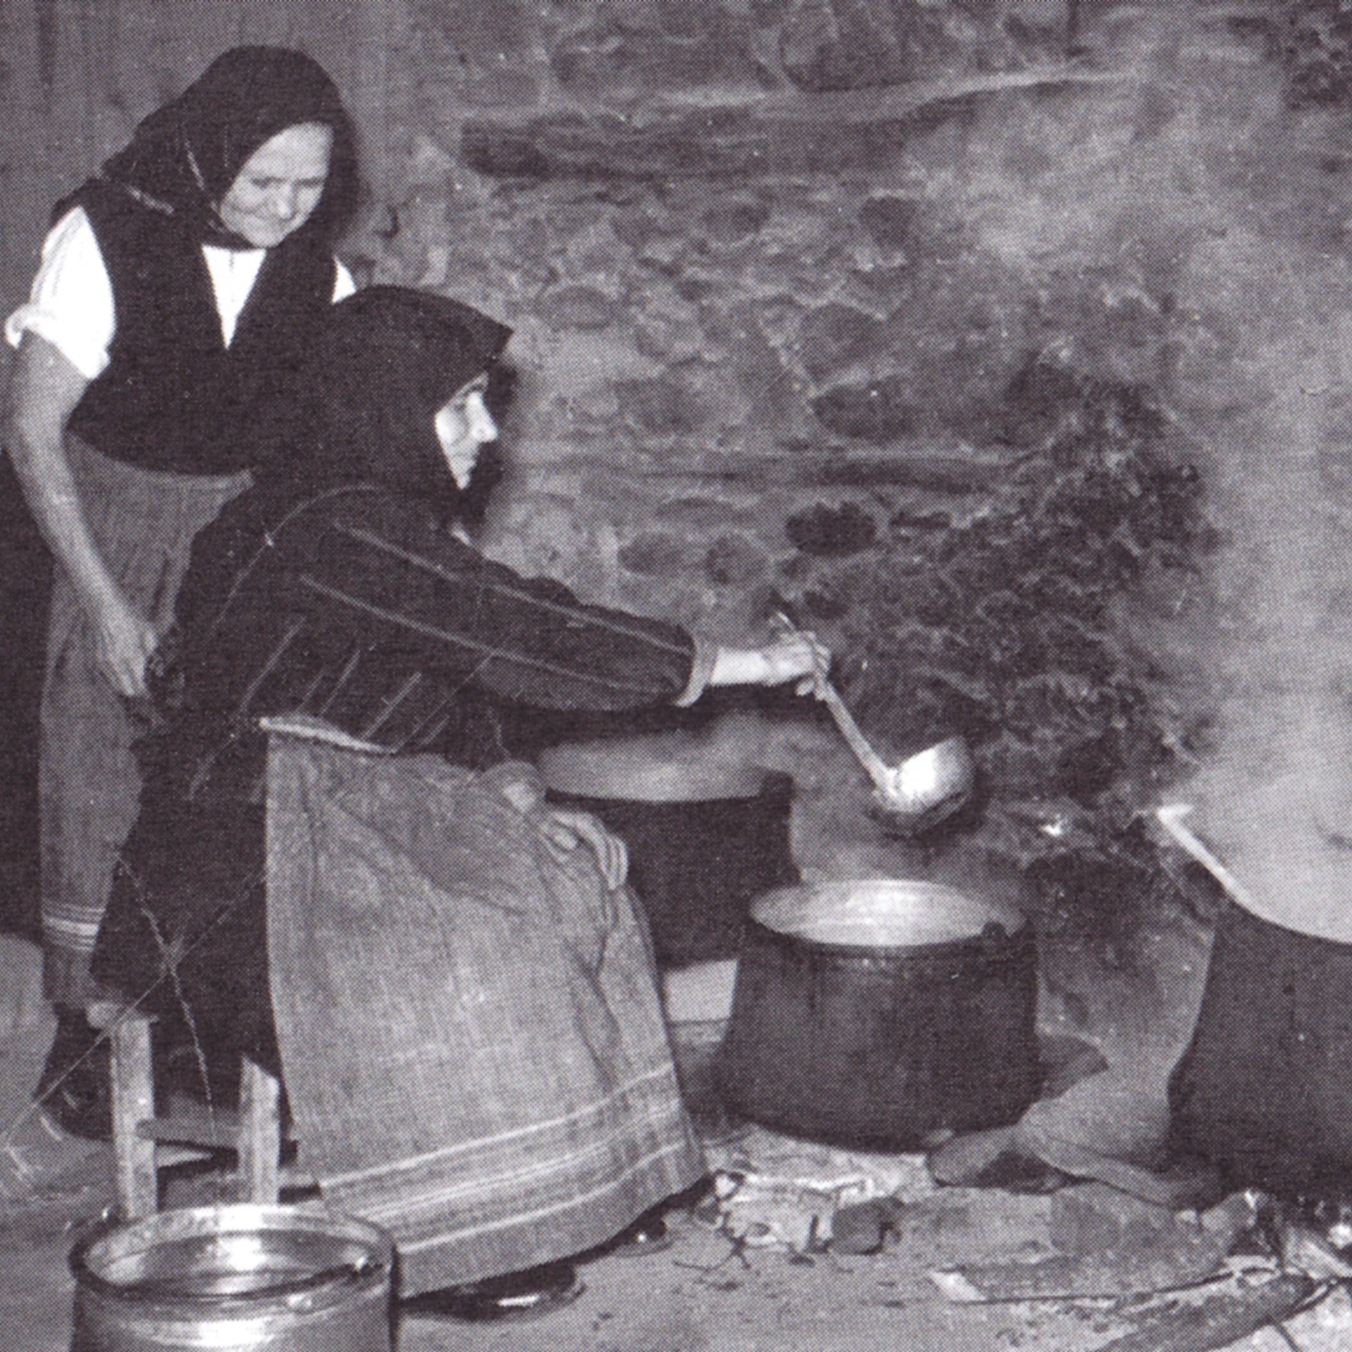 Women cooking on a hearth - black and white photo.